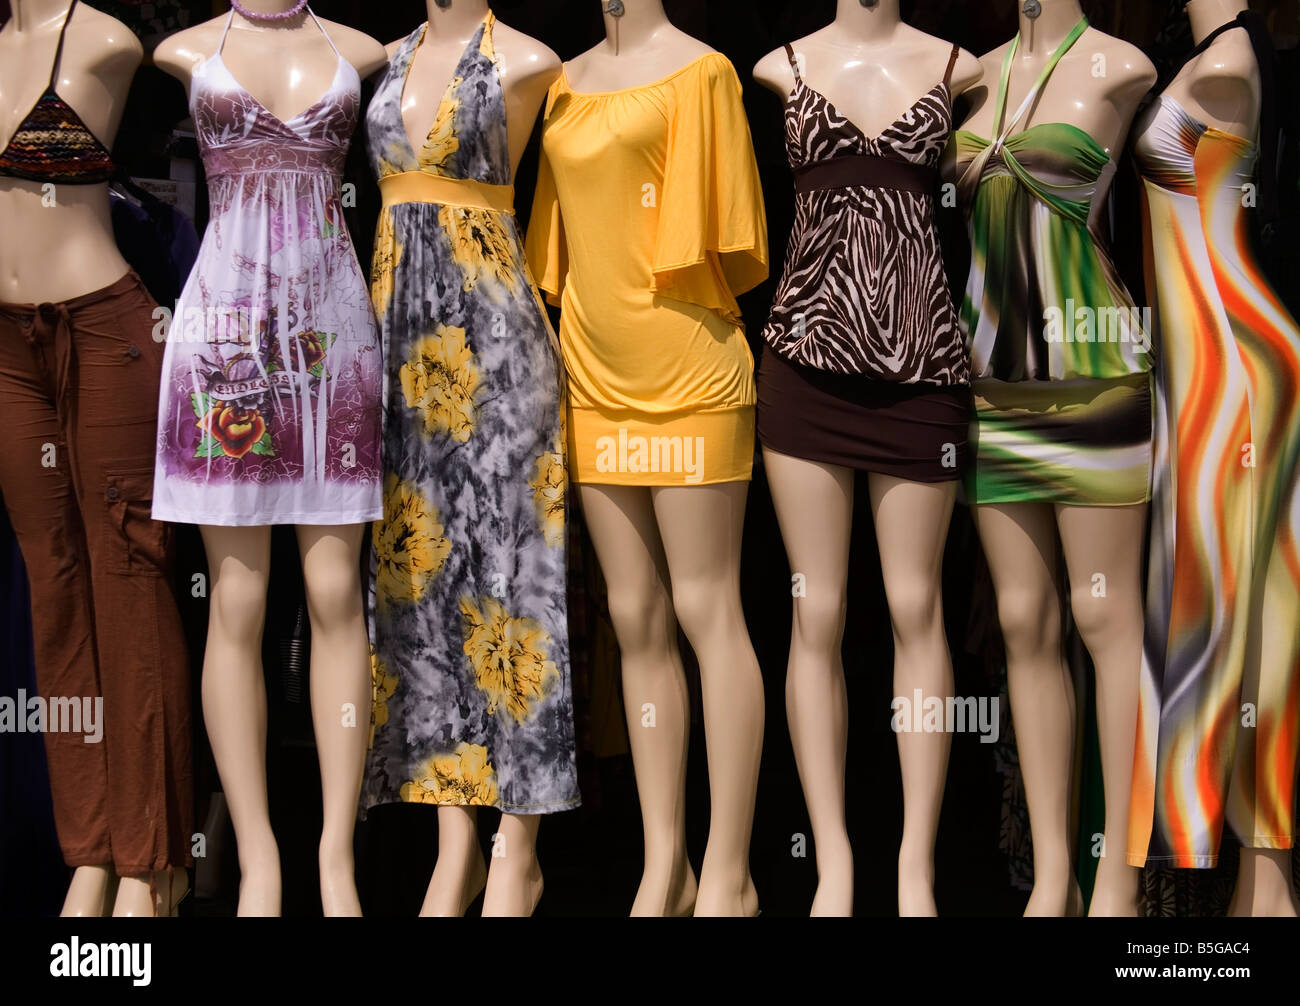 Frame filling image of a group of mannequins outside a casual clothing shop, each wearing a colorful summer outfit. Stock Photo